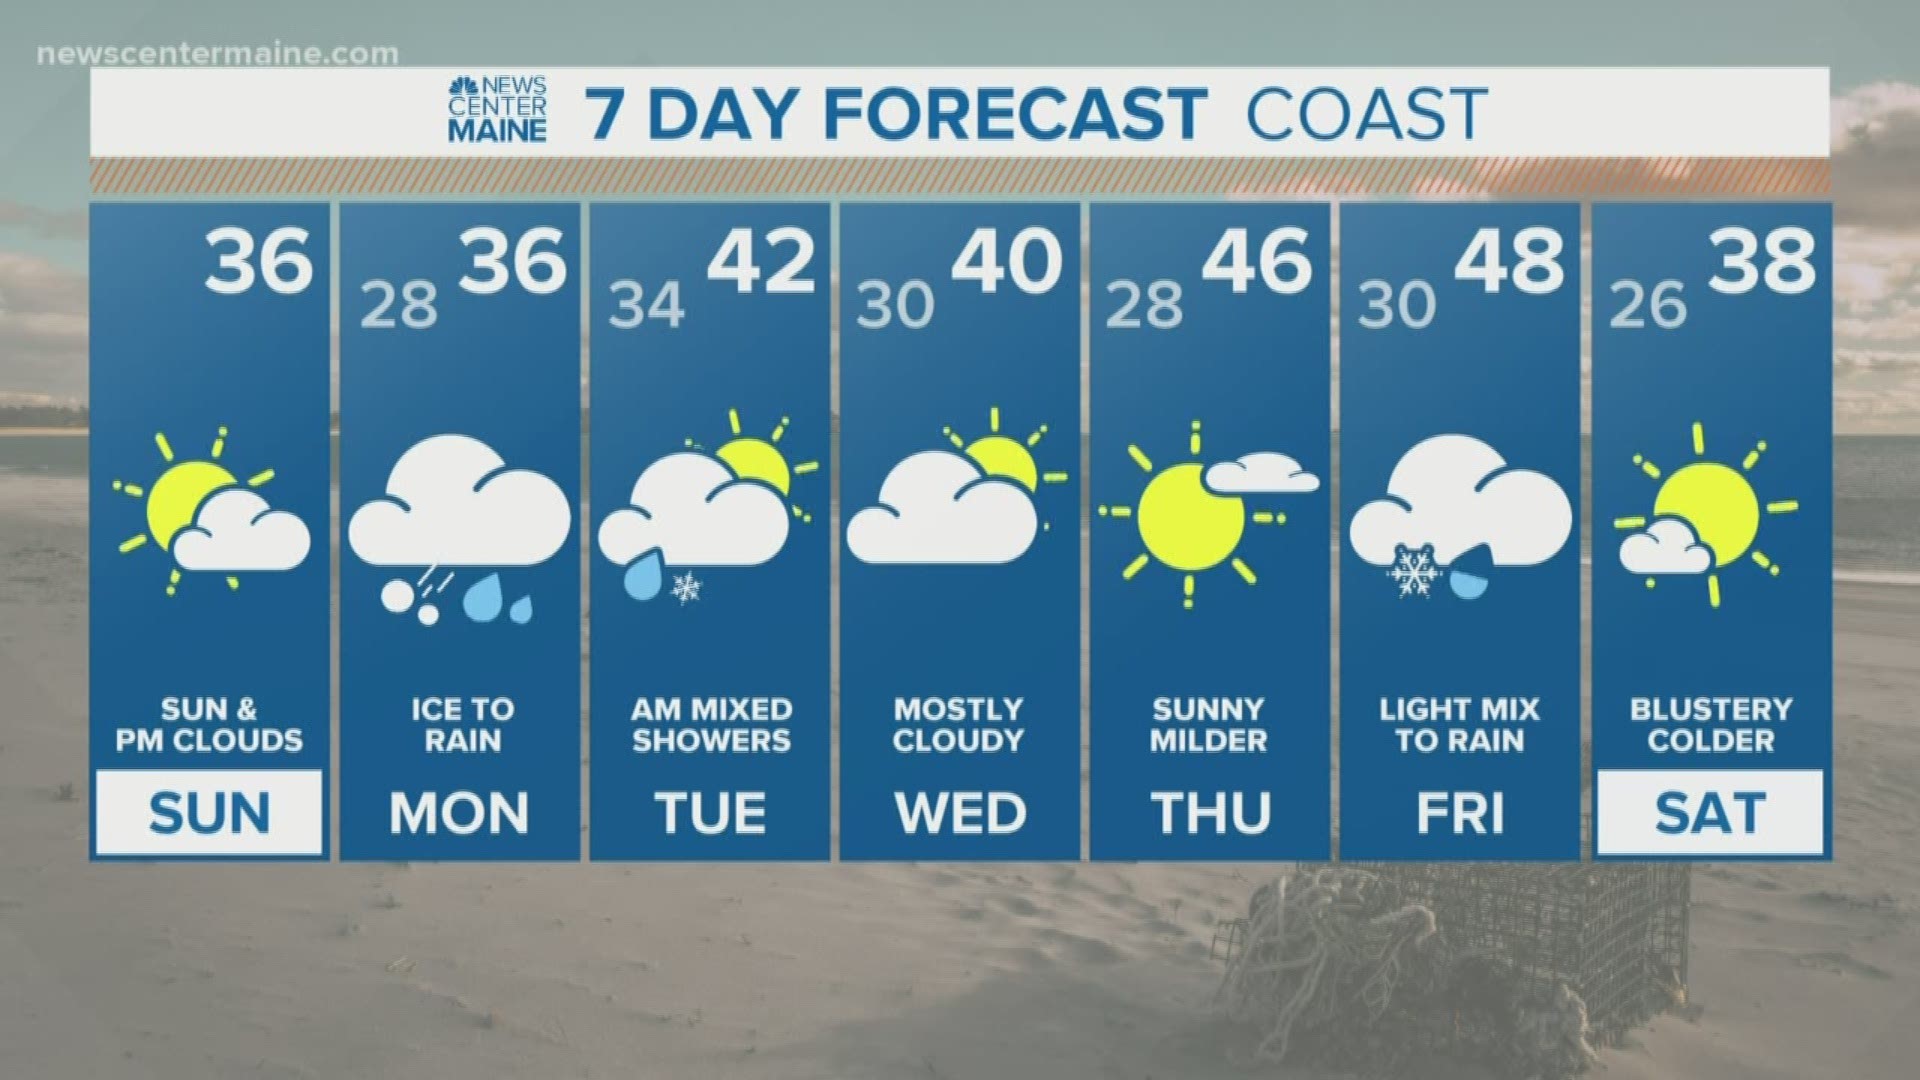 NEWS CENTER Maine weather video forecast. Updated on 11-17-19 at 8:00 am.